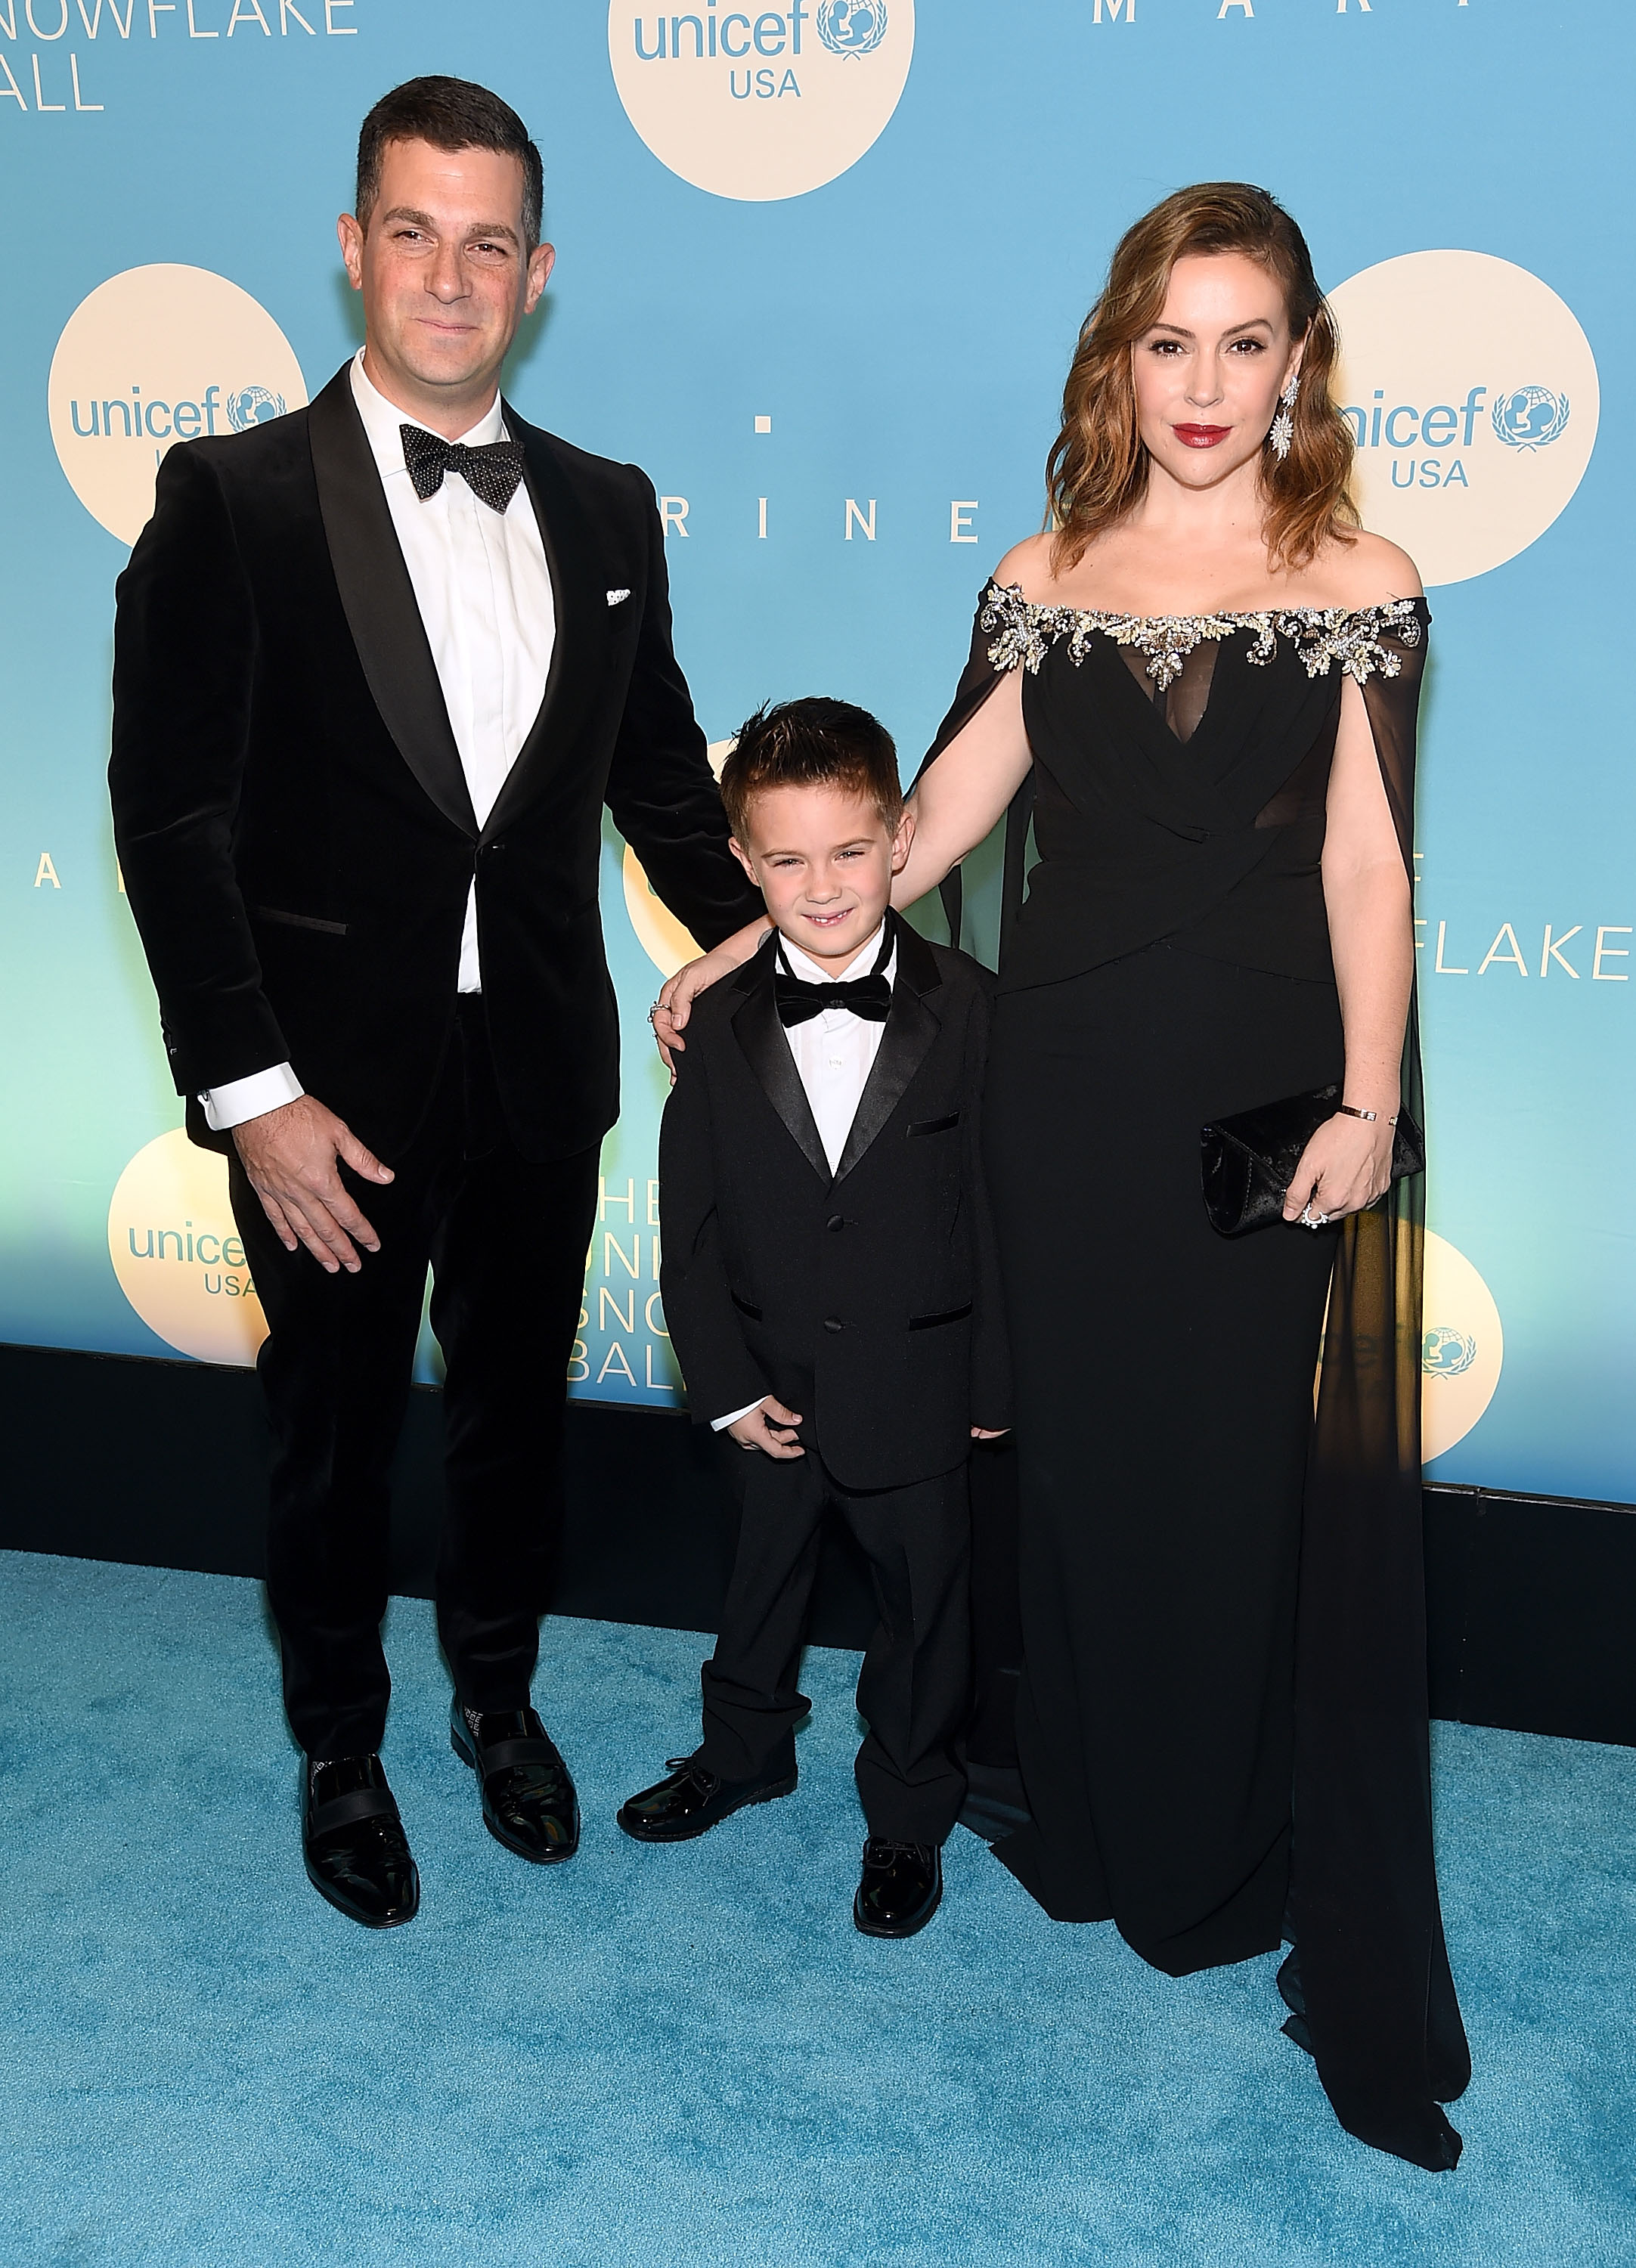 David and Milo Bugliari with Alyssa Milano at UNICEF USA's 14th Annual Snowflake Ball in New York City, 2018 | Source: Getty Images